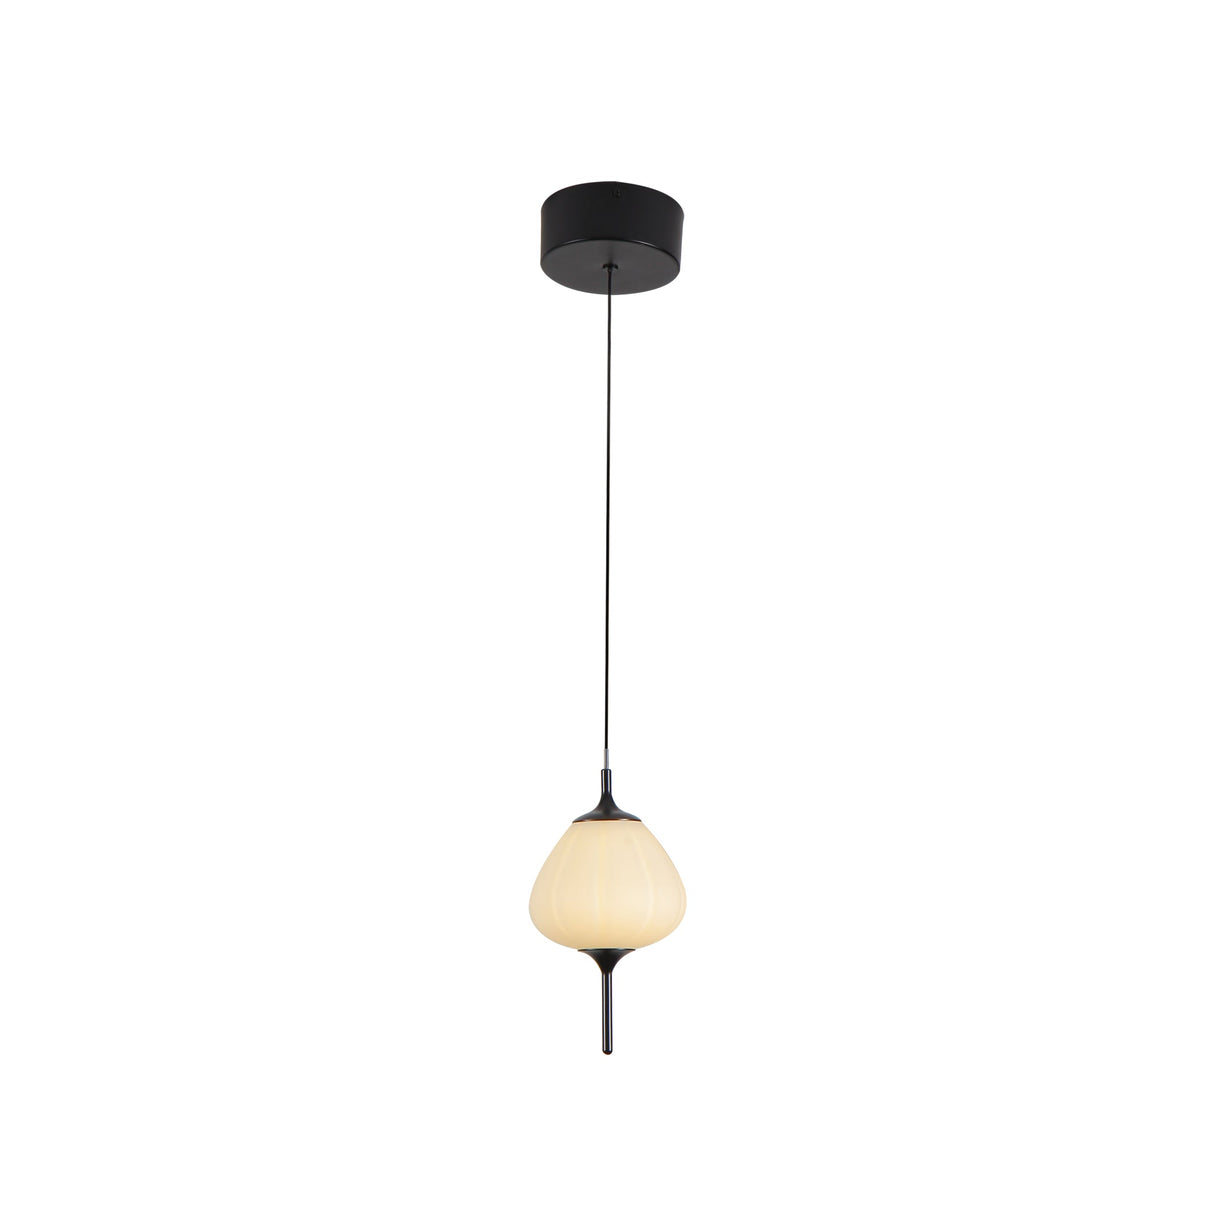 VONN Artisan Lecce VAP2221BL 5" Integrated LED ETL Certified Height Adjustable Pendant with Glass Shade